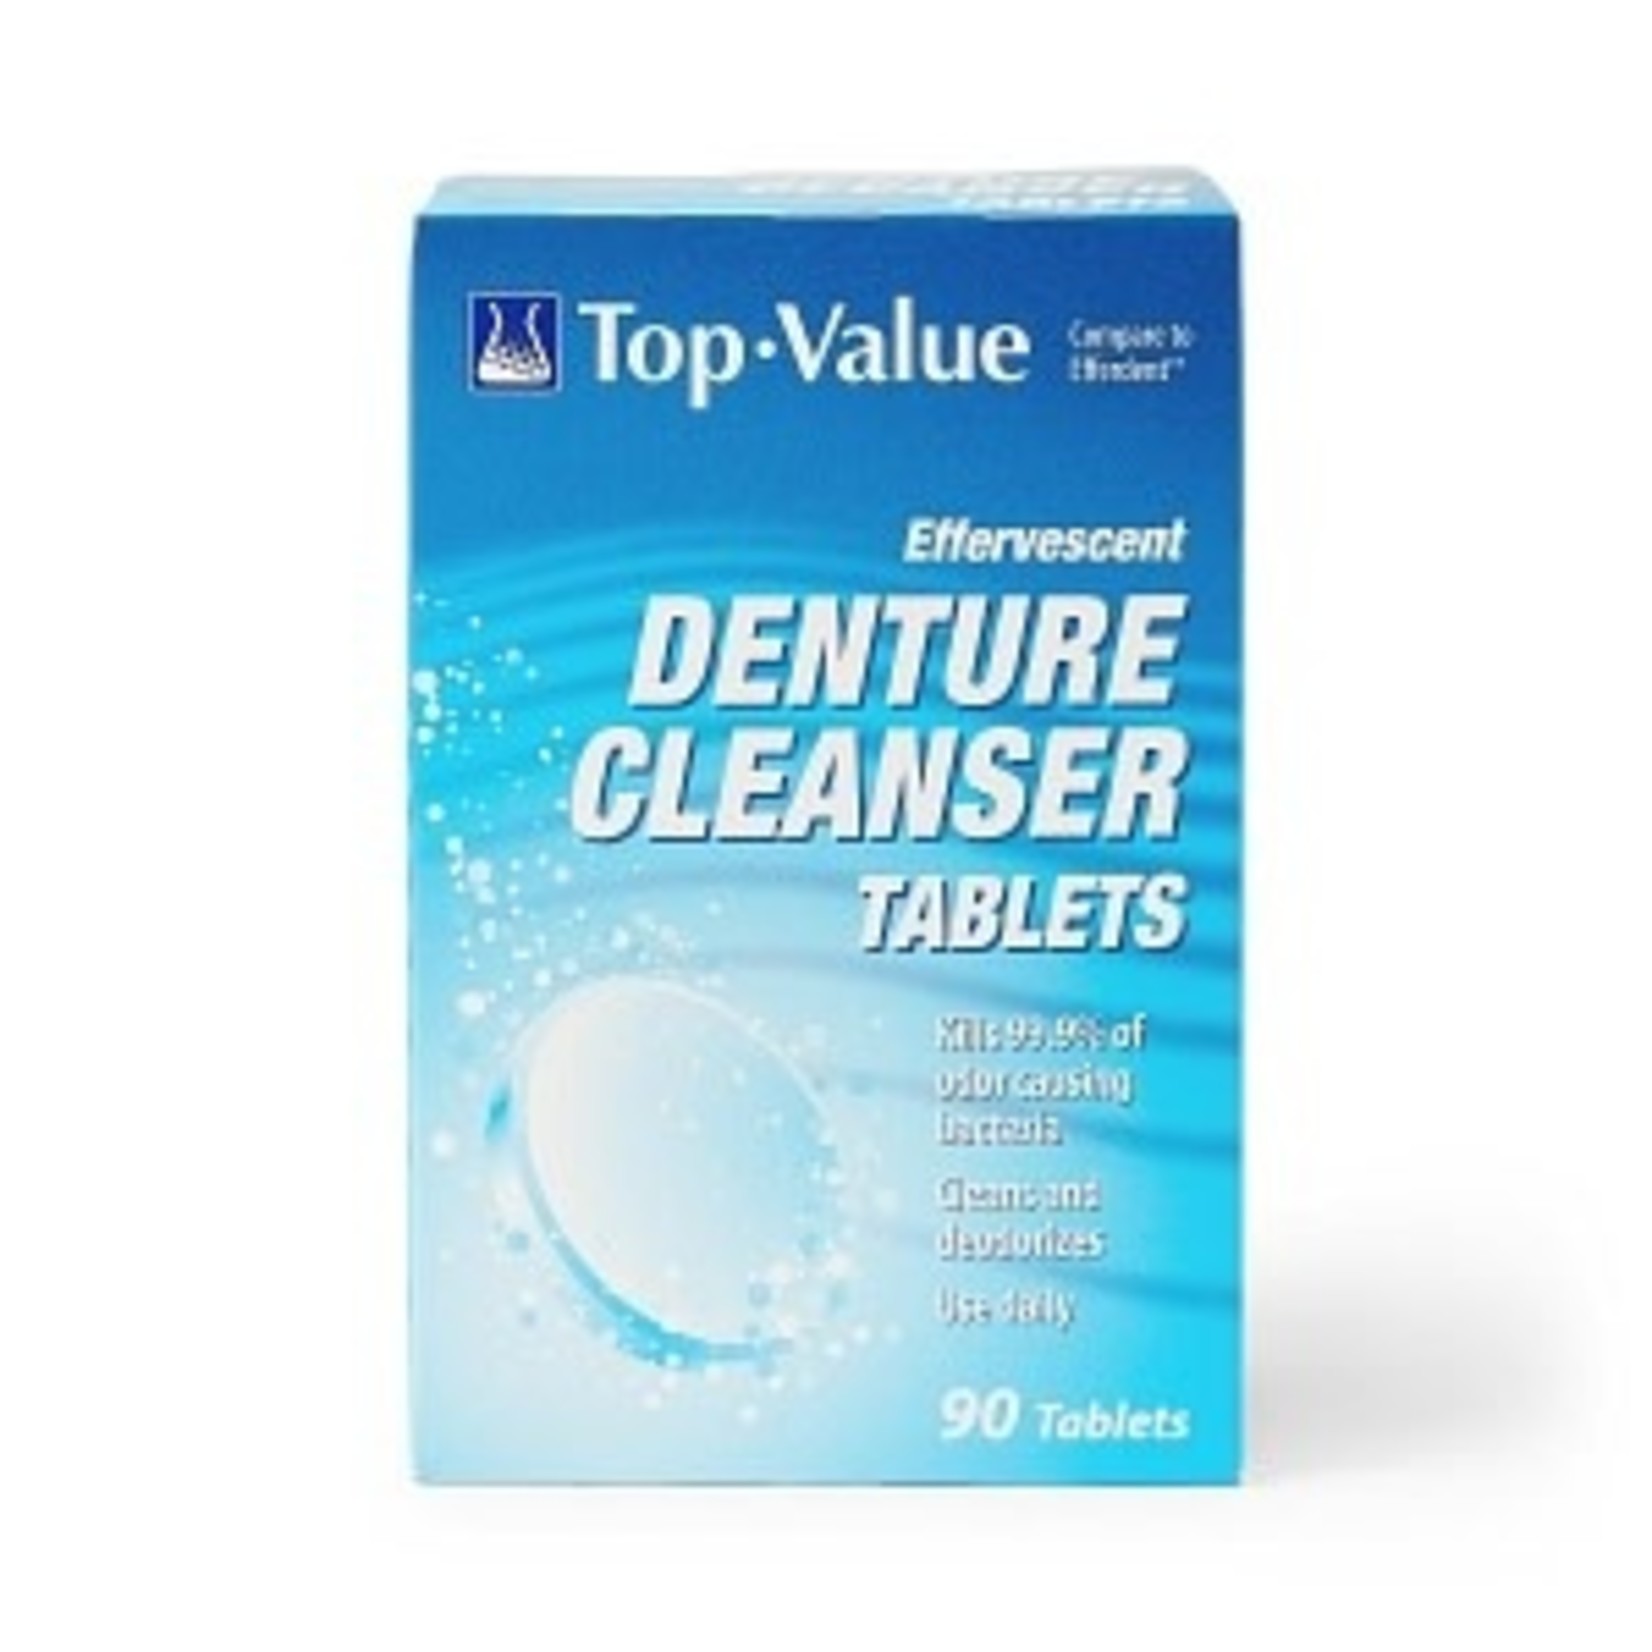 TopValue Denture Cleansing Tablets 90ct.